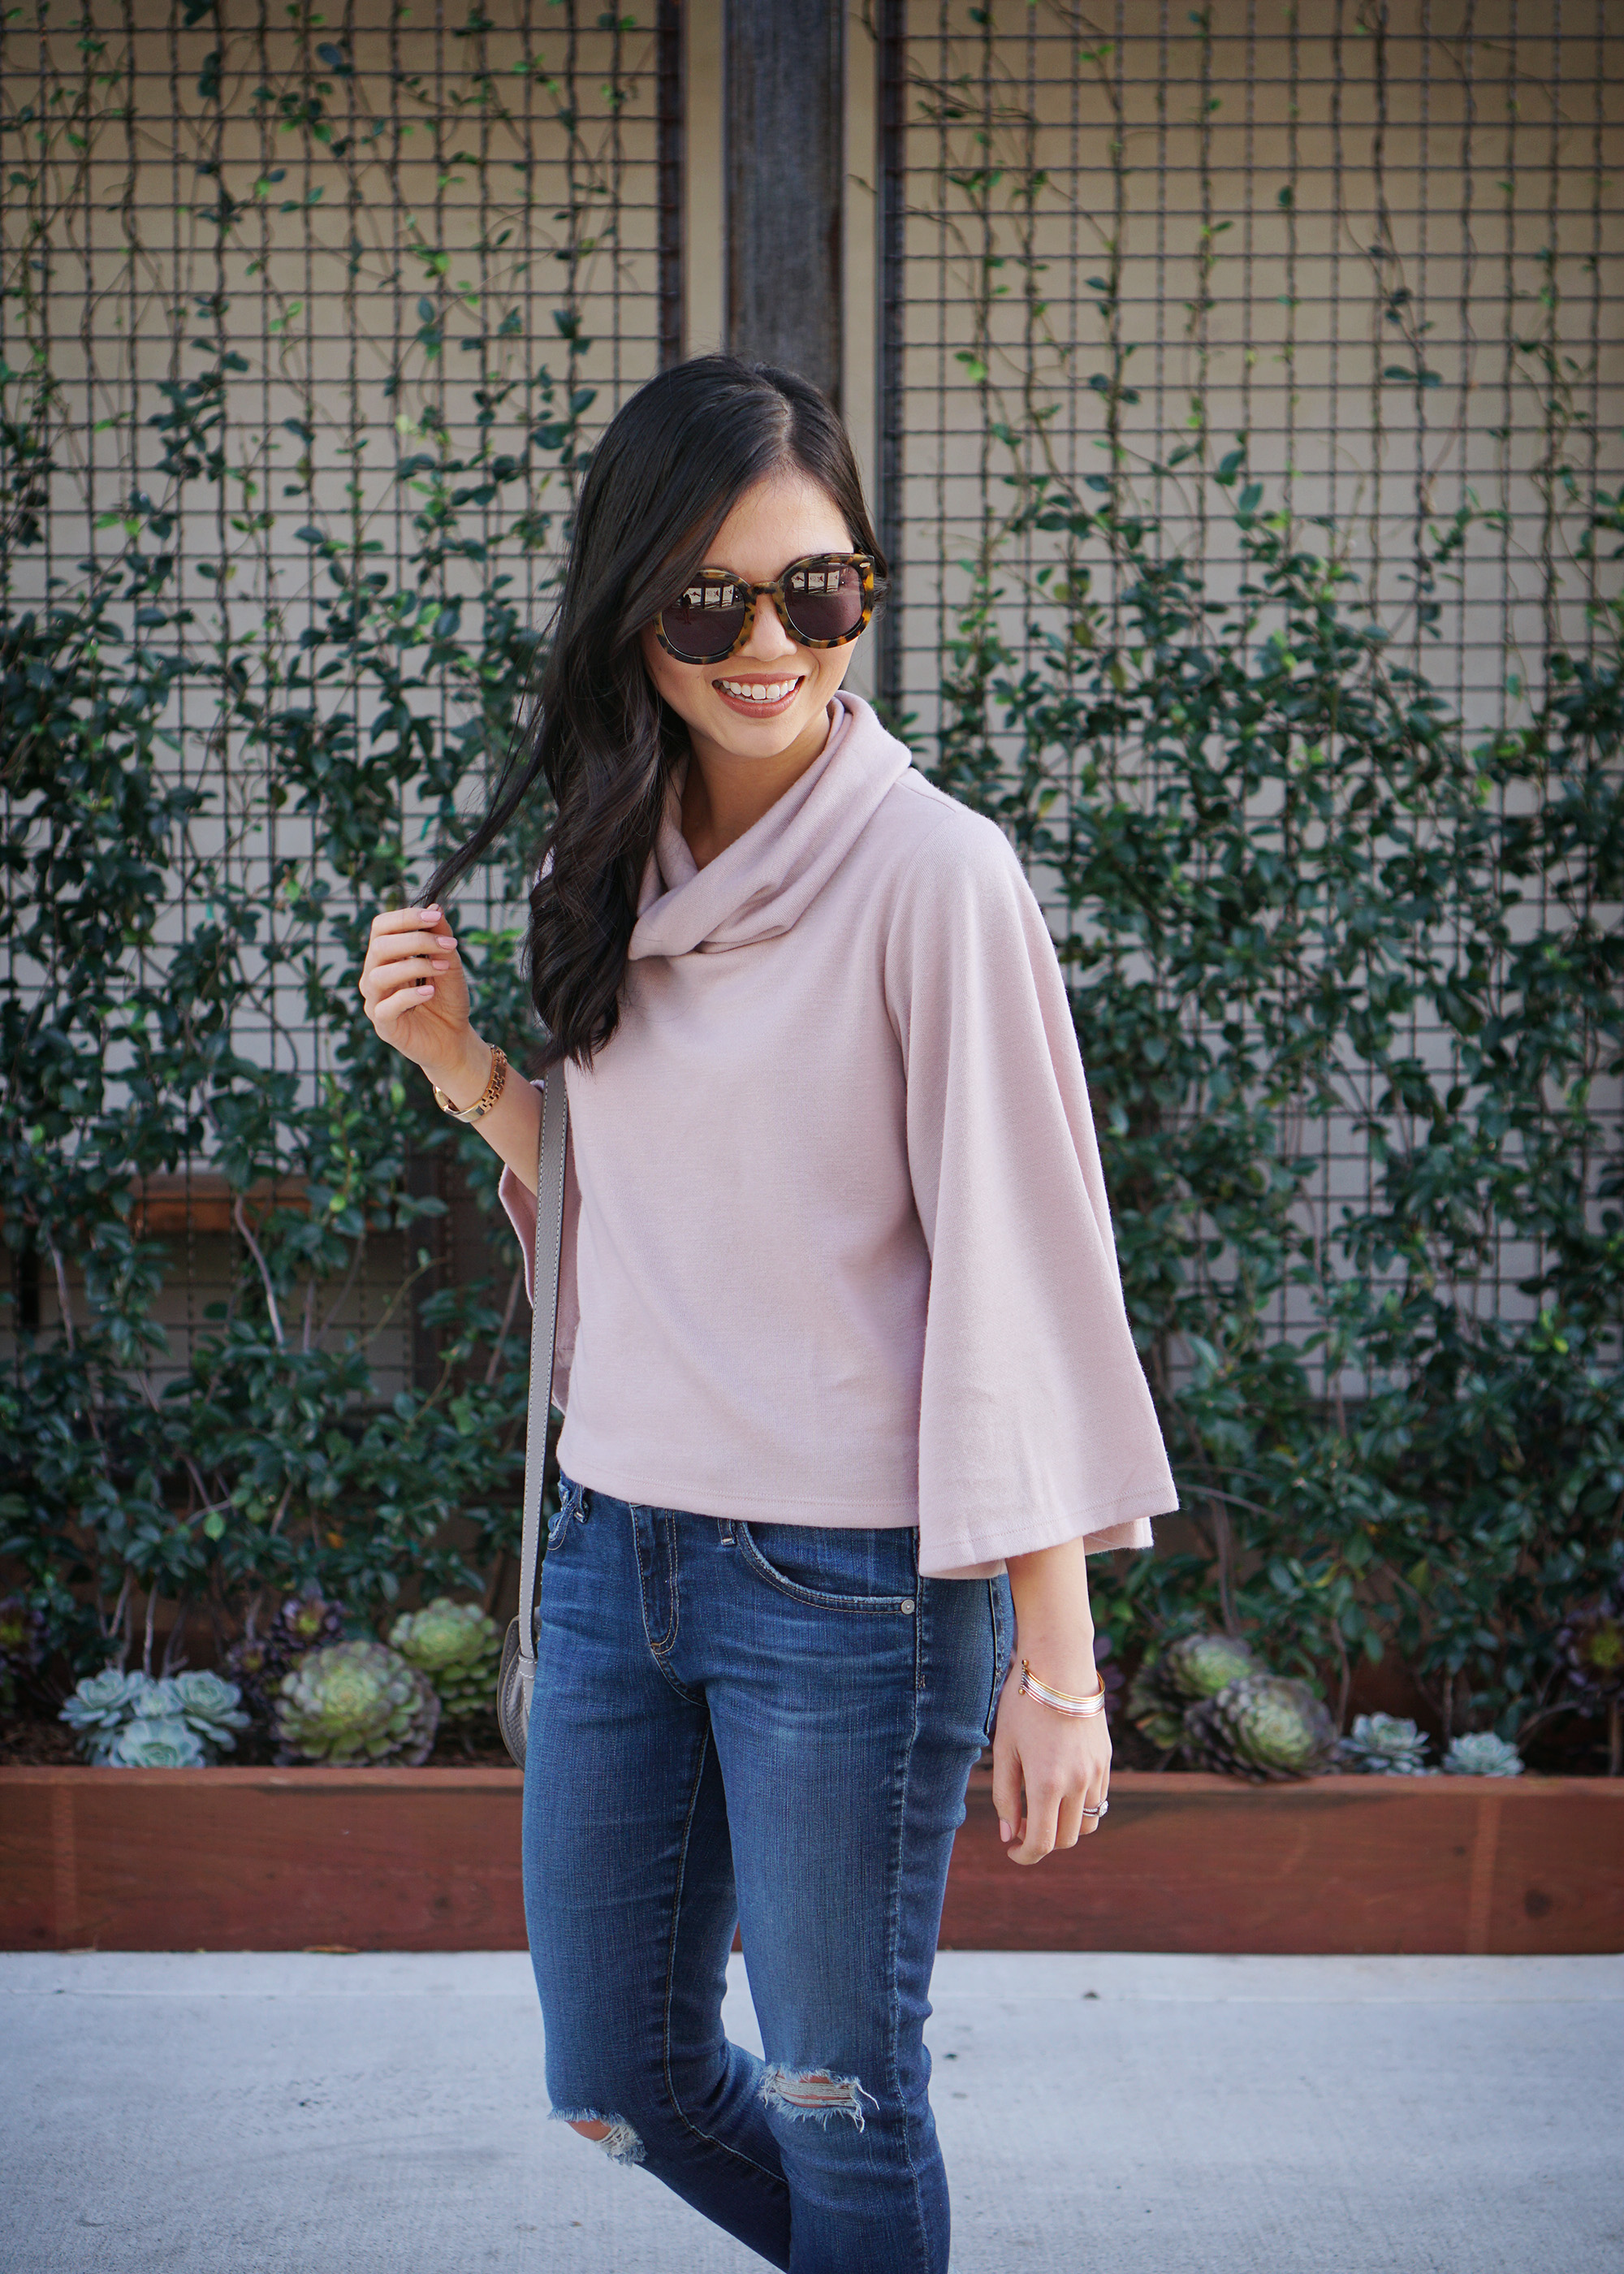 Skirt The Rules / Dusty Pink Bell Sleeve Sweater